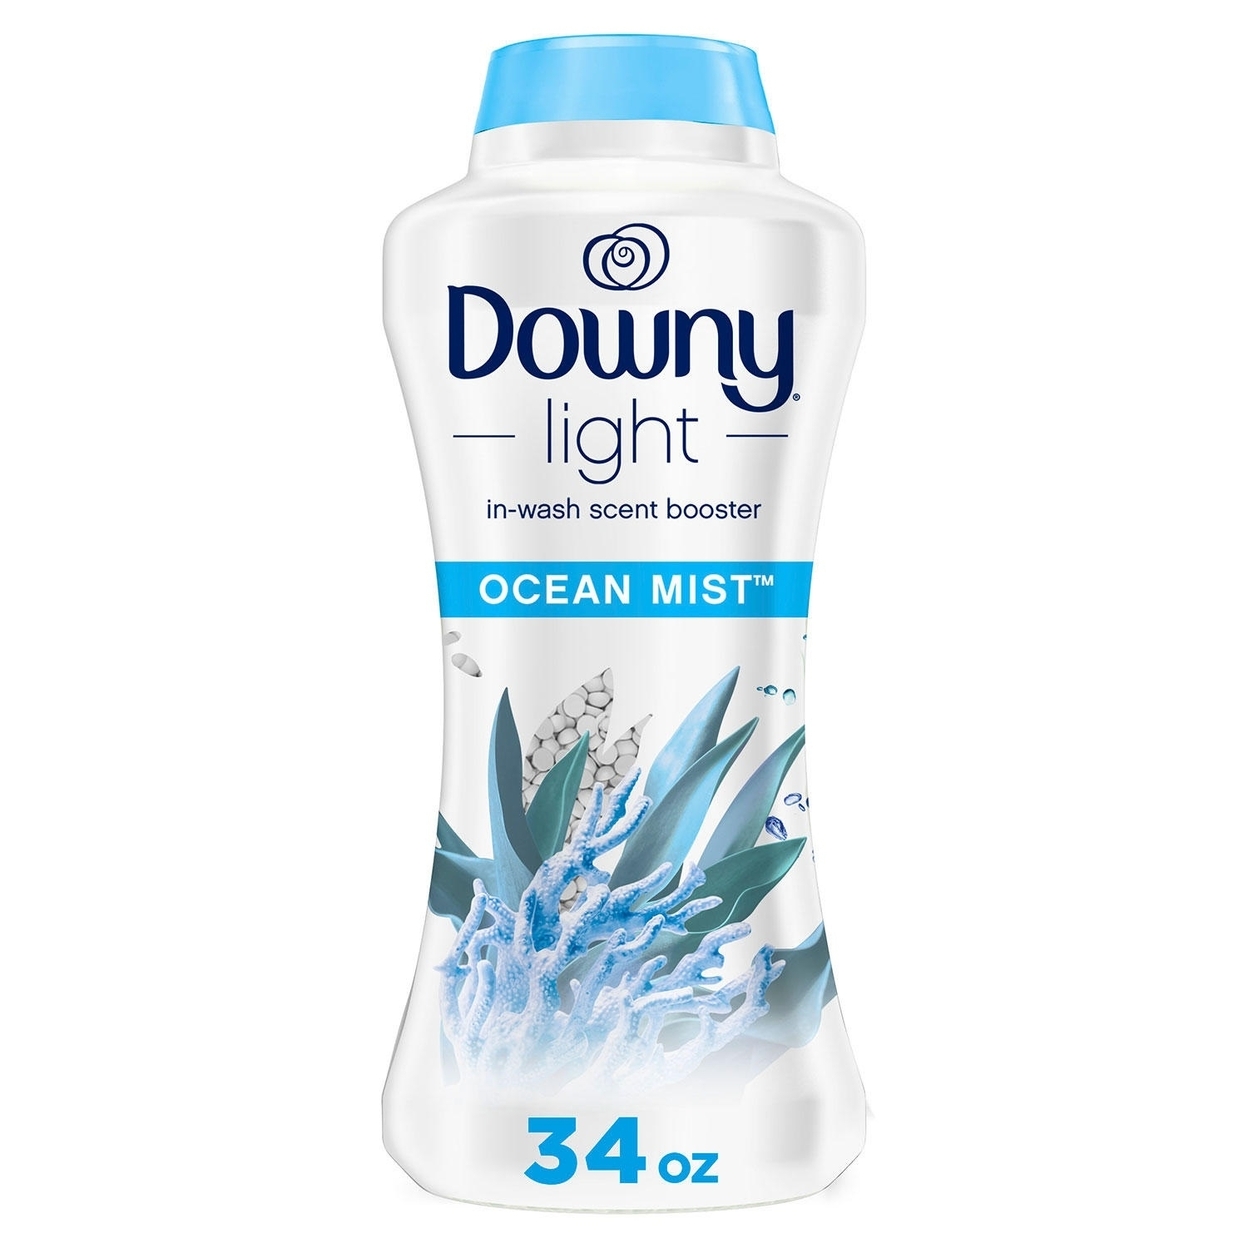 Downy Light In-Wash Scent Booster Beads, Ocean Mist (34 Ounce)